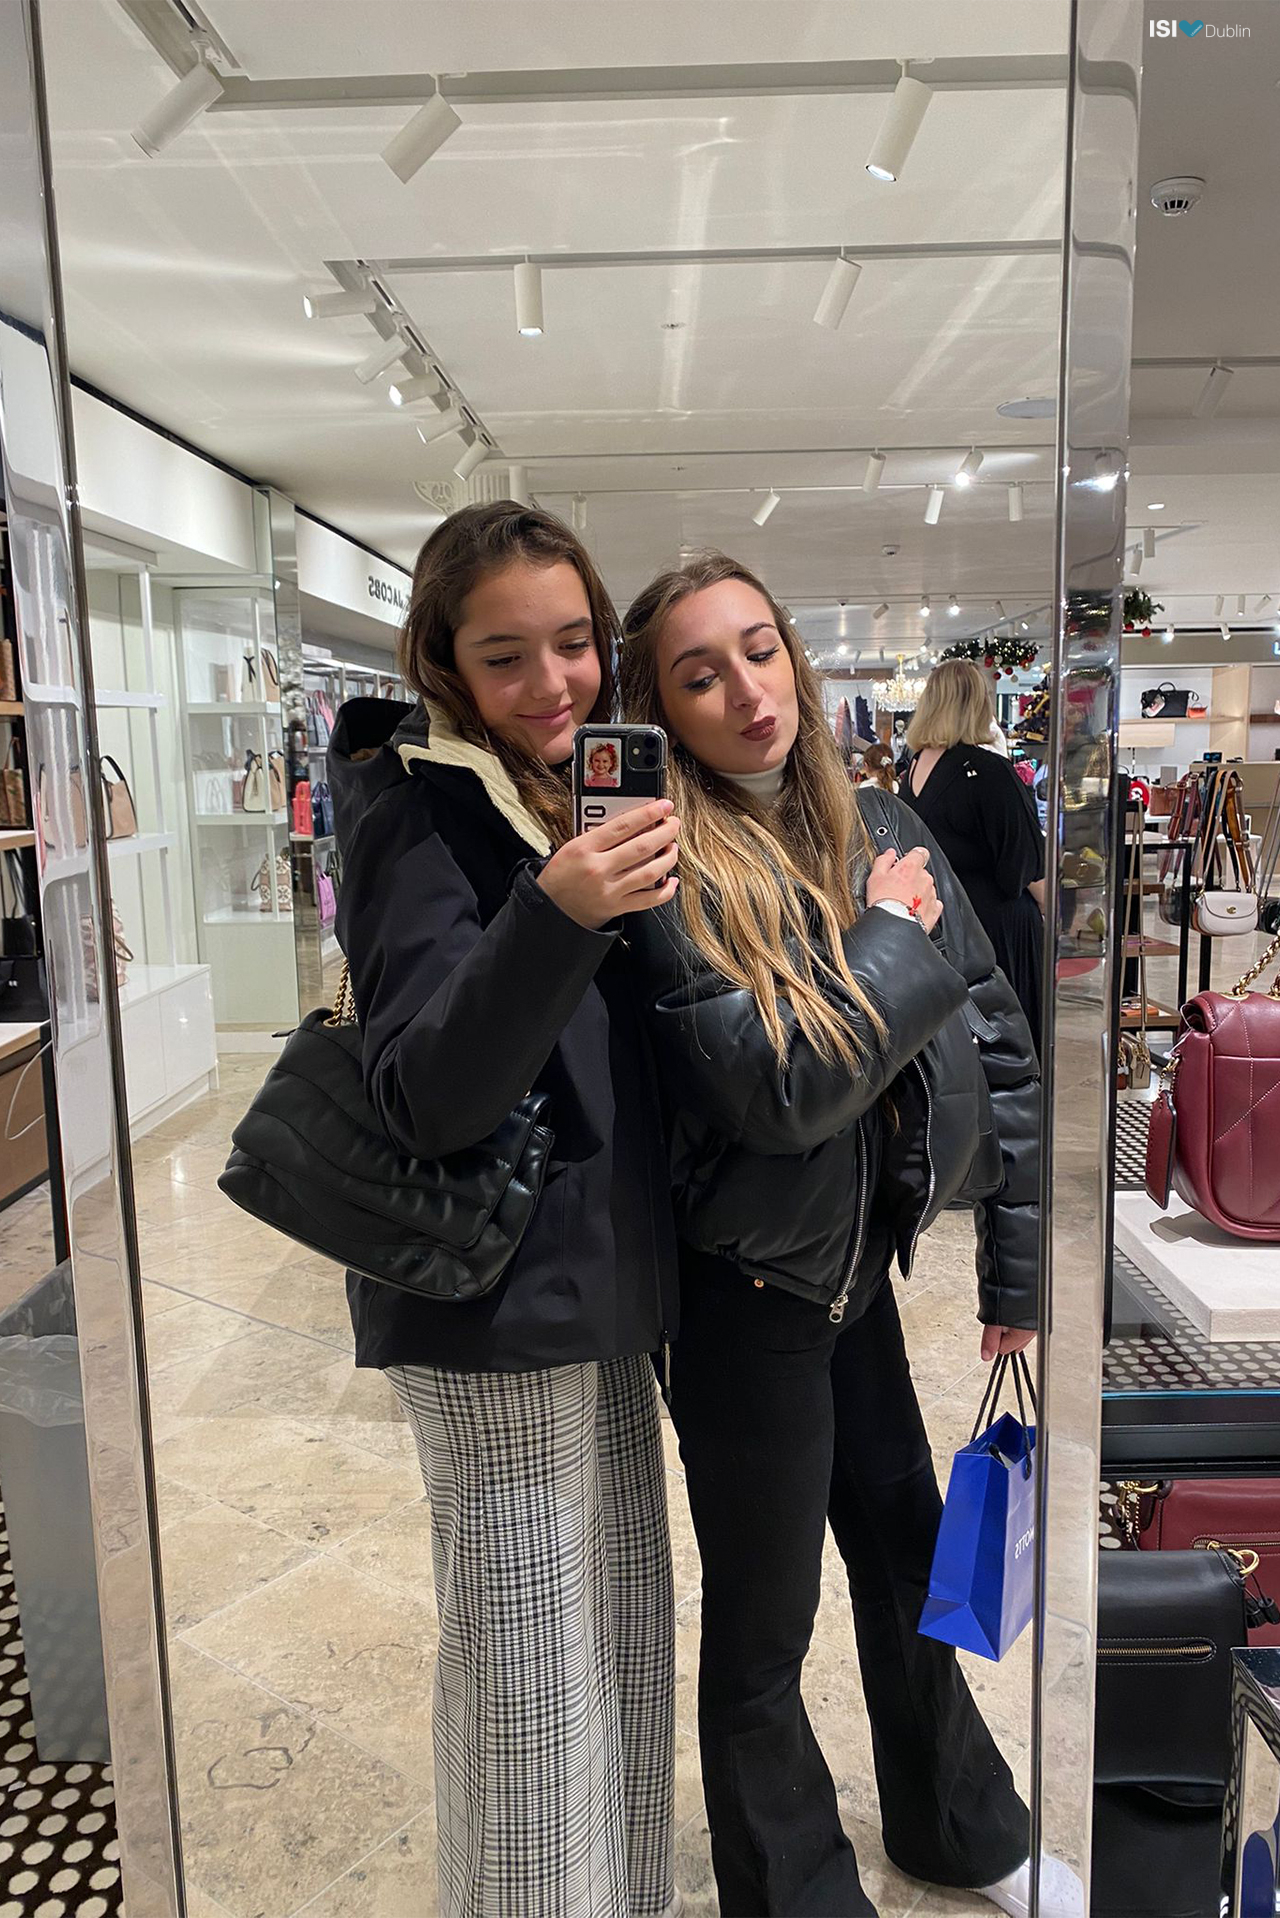 Abril and Martina doing some shopping